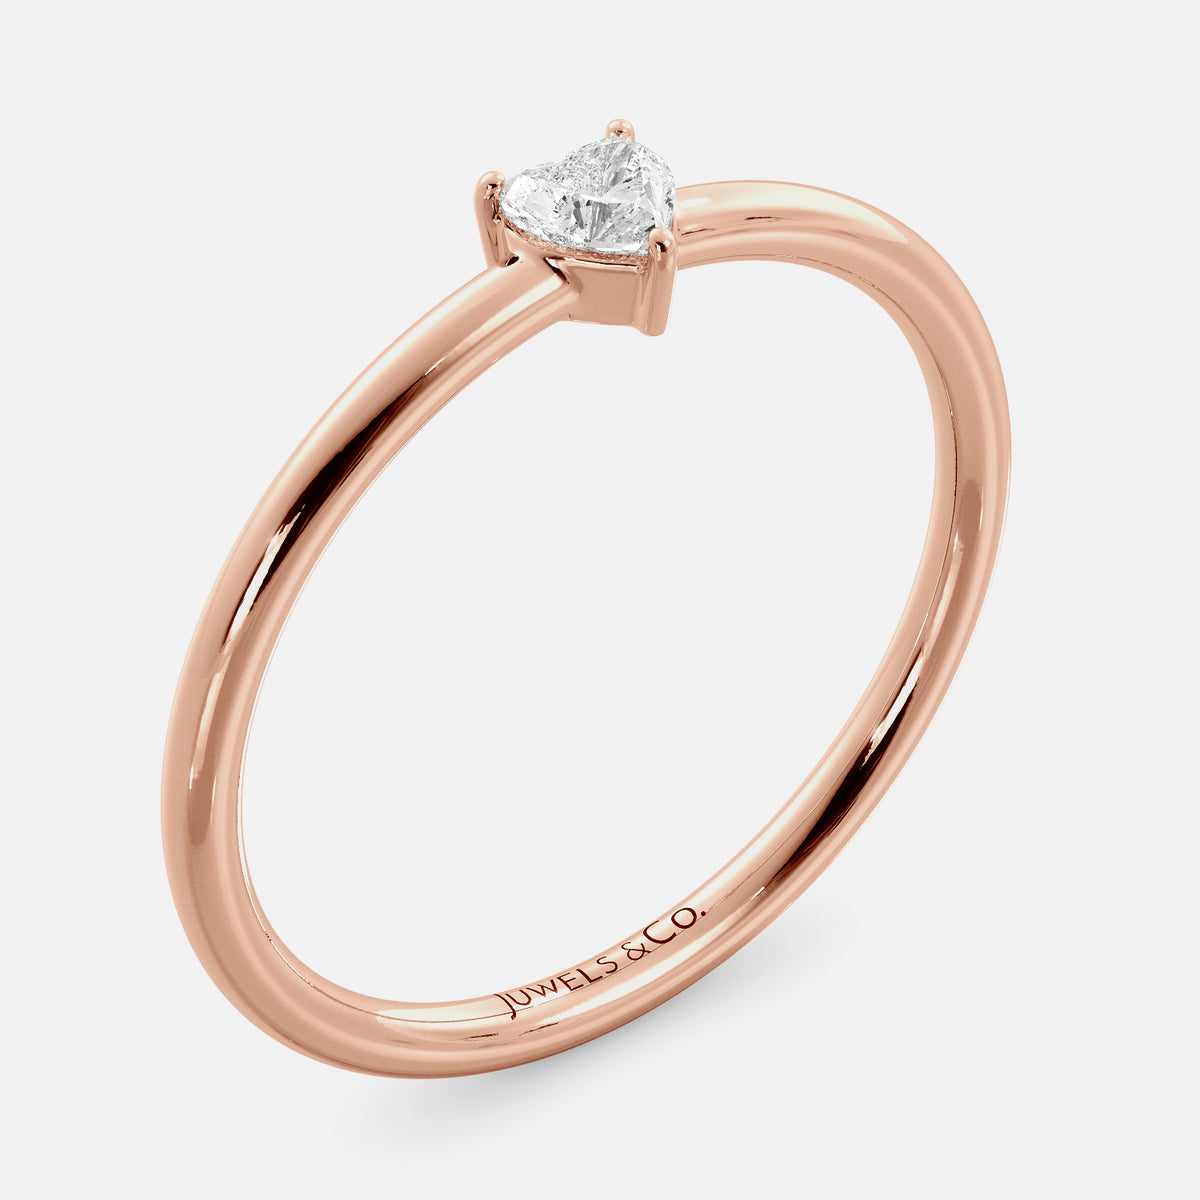 A close-up of a heart-shaped solitaire diamond ring in recycled rose gold. The ring is set with a single, large diamond in the center of a heart-shaped setting. The ring is made of recycled rose gold and has a simple, elegant design. The diamond is sparkling and reflects light beautifully. The ring is a perfect gift for a loved one or a special occasion.